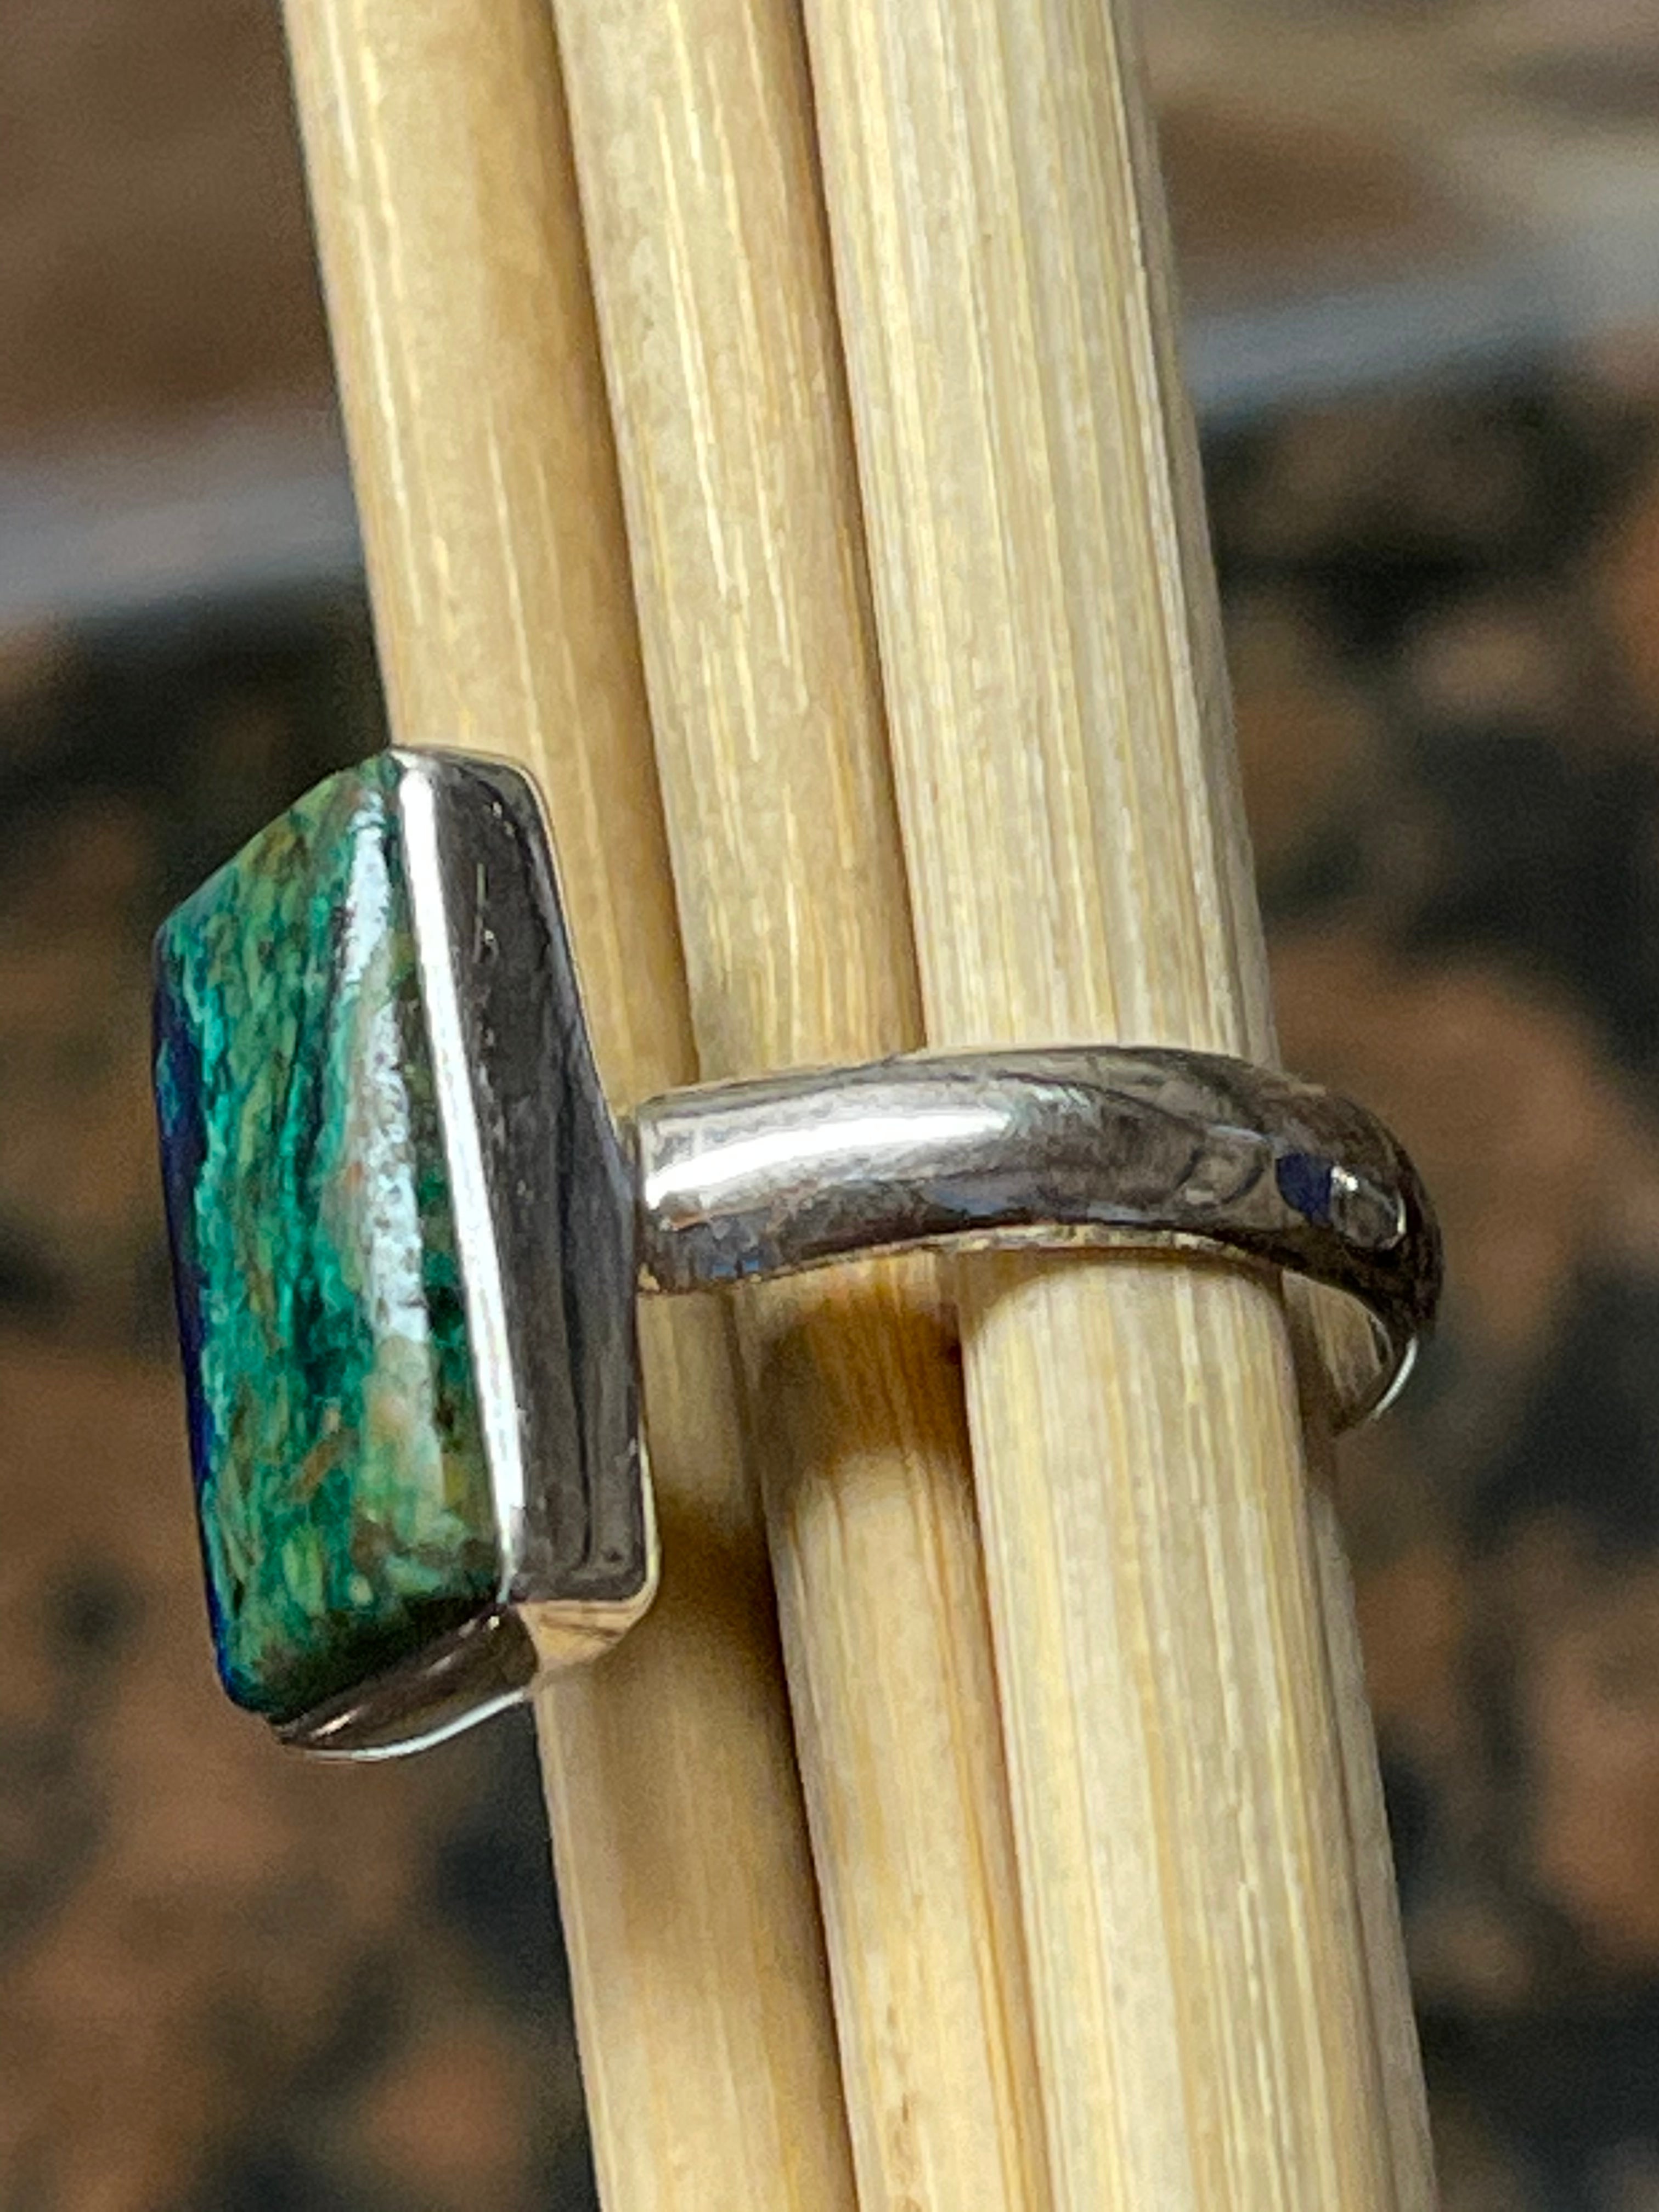 Natural Malachite in Azurite 925 Solid Sterling Silver Scenic Ring Size 6.5 - Natural Rocks by Kala